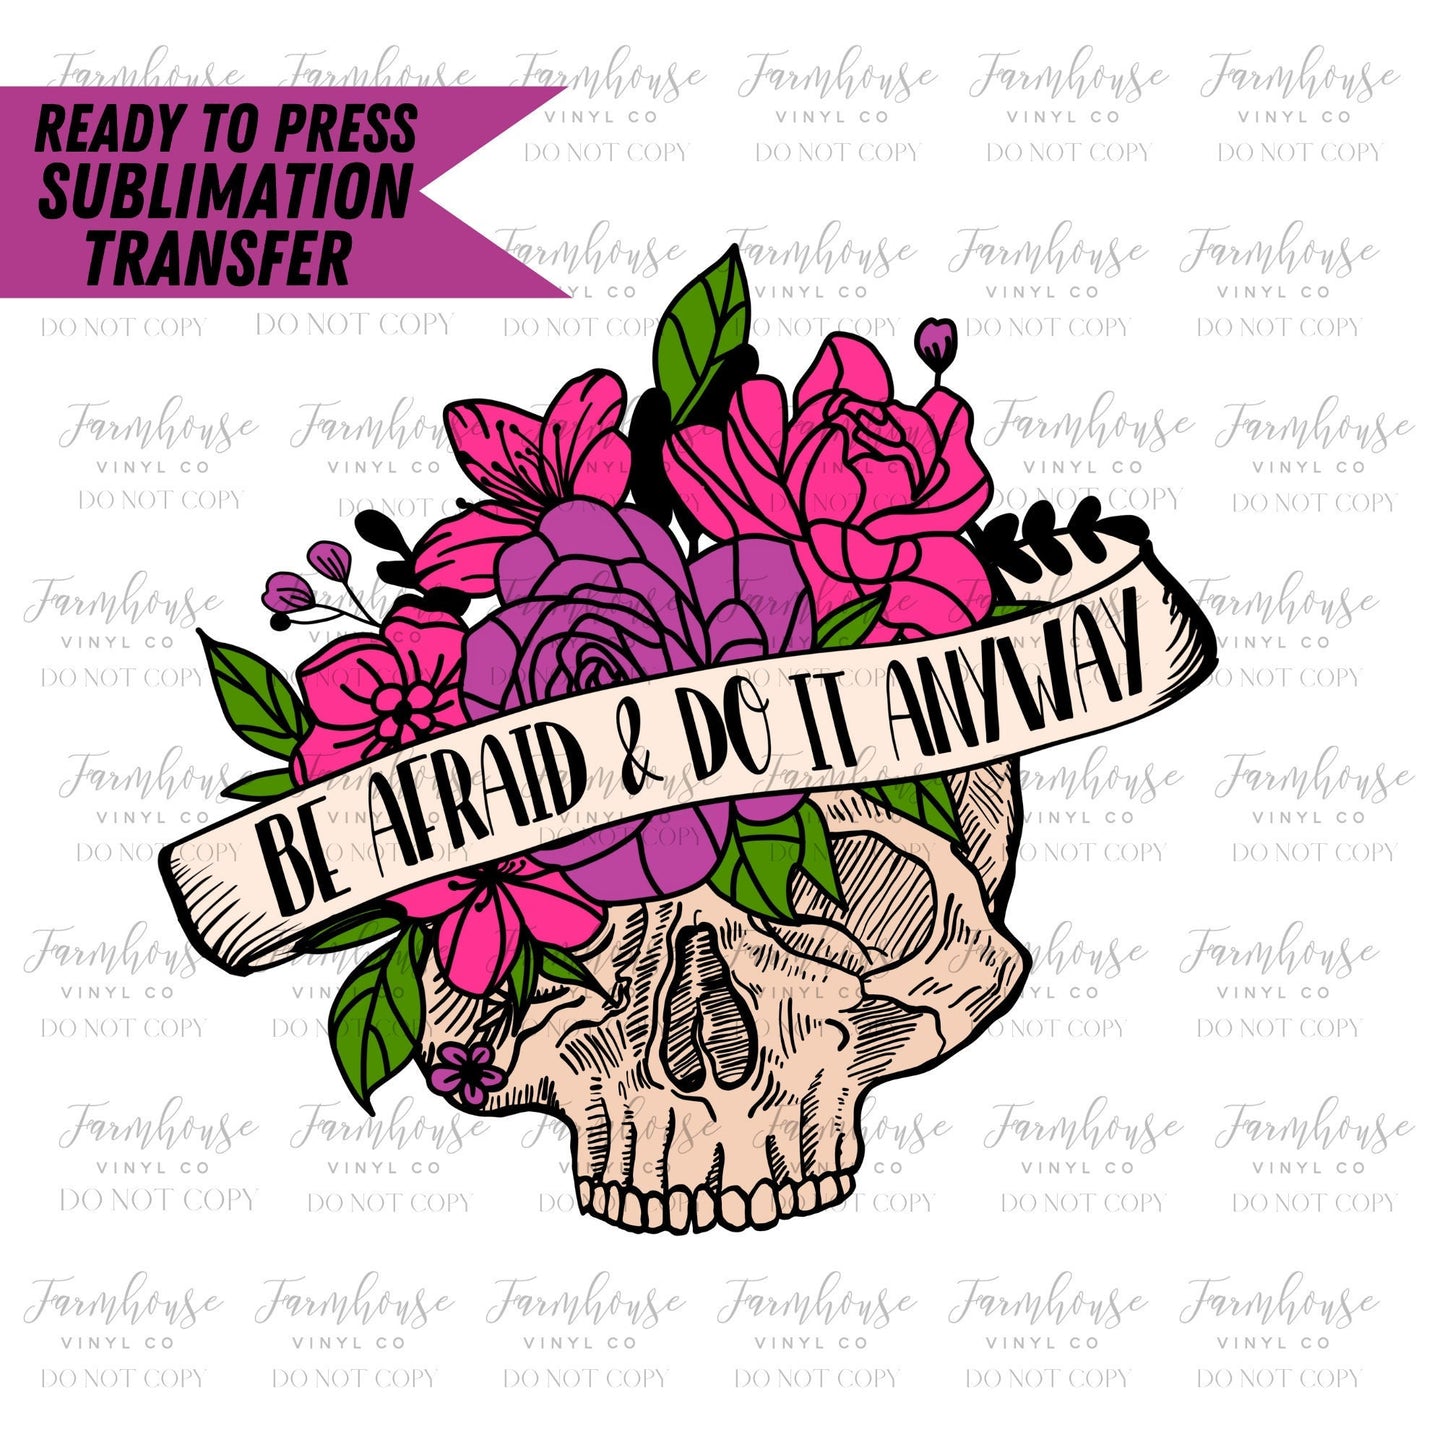 Be Scared & Do it Anyway, Ready To Press Sublimation Transfers, Floral Skull, Pocket Design, Sublimation Prints, Motivational Design Print